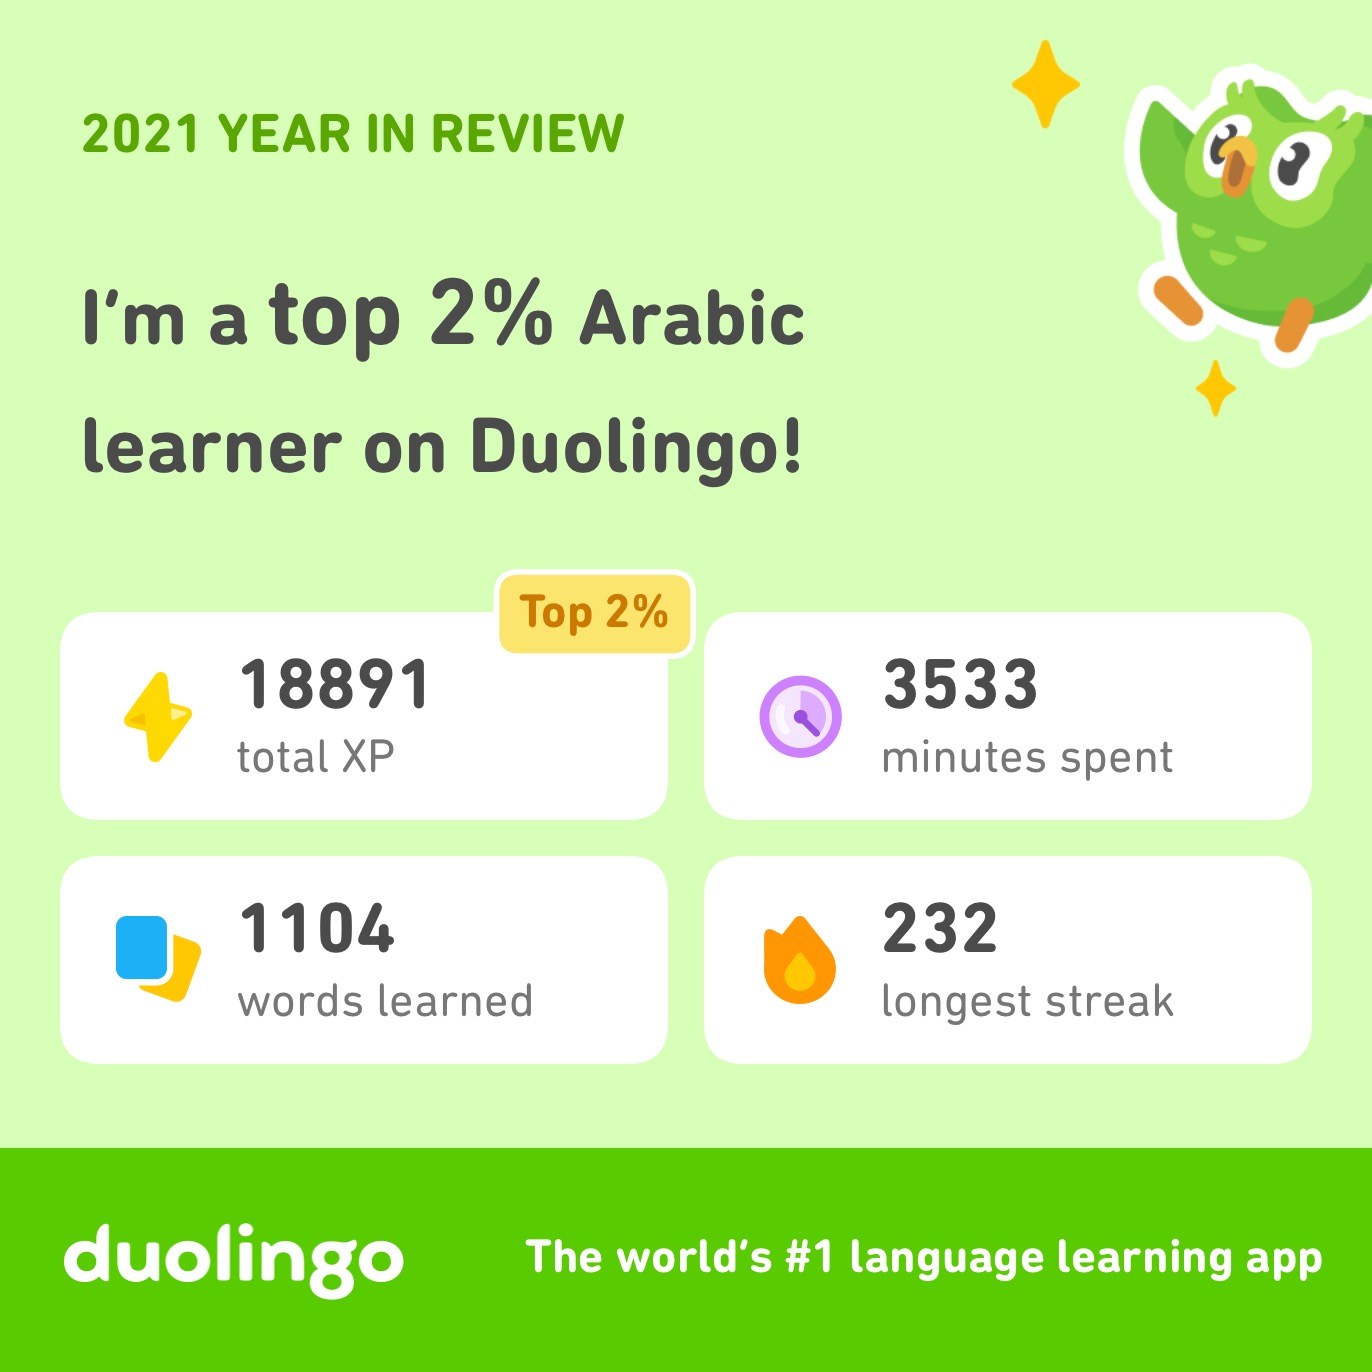 Duolingo stats: almost 60 hours total; a couple of lessons every day, 232 days in a row